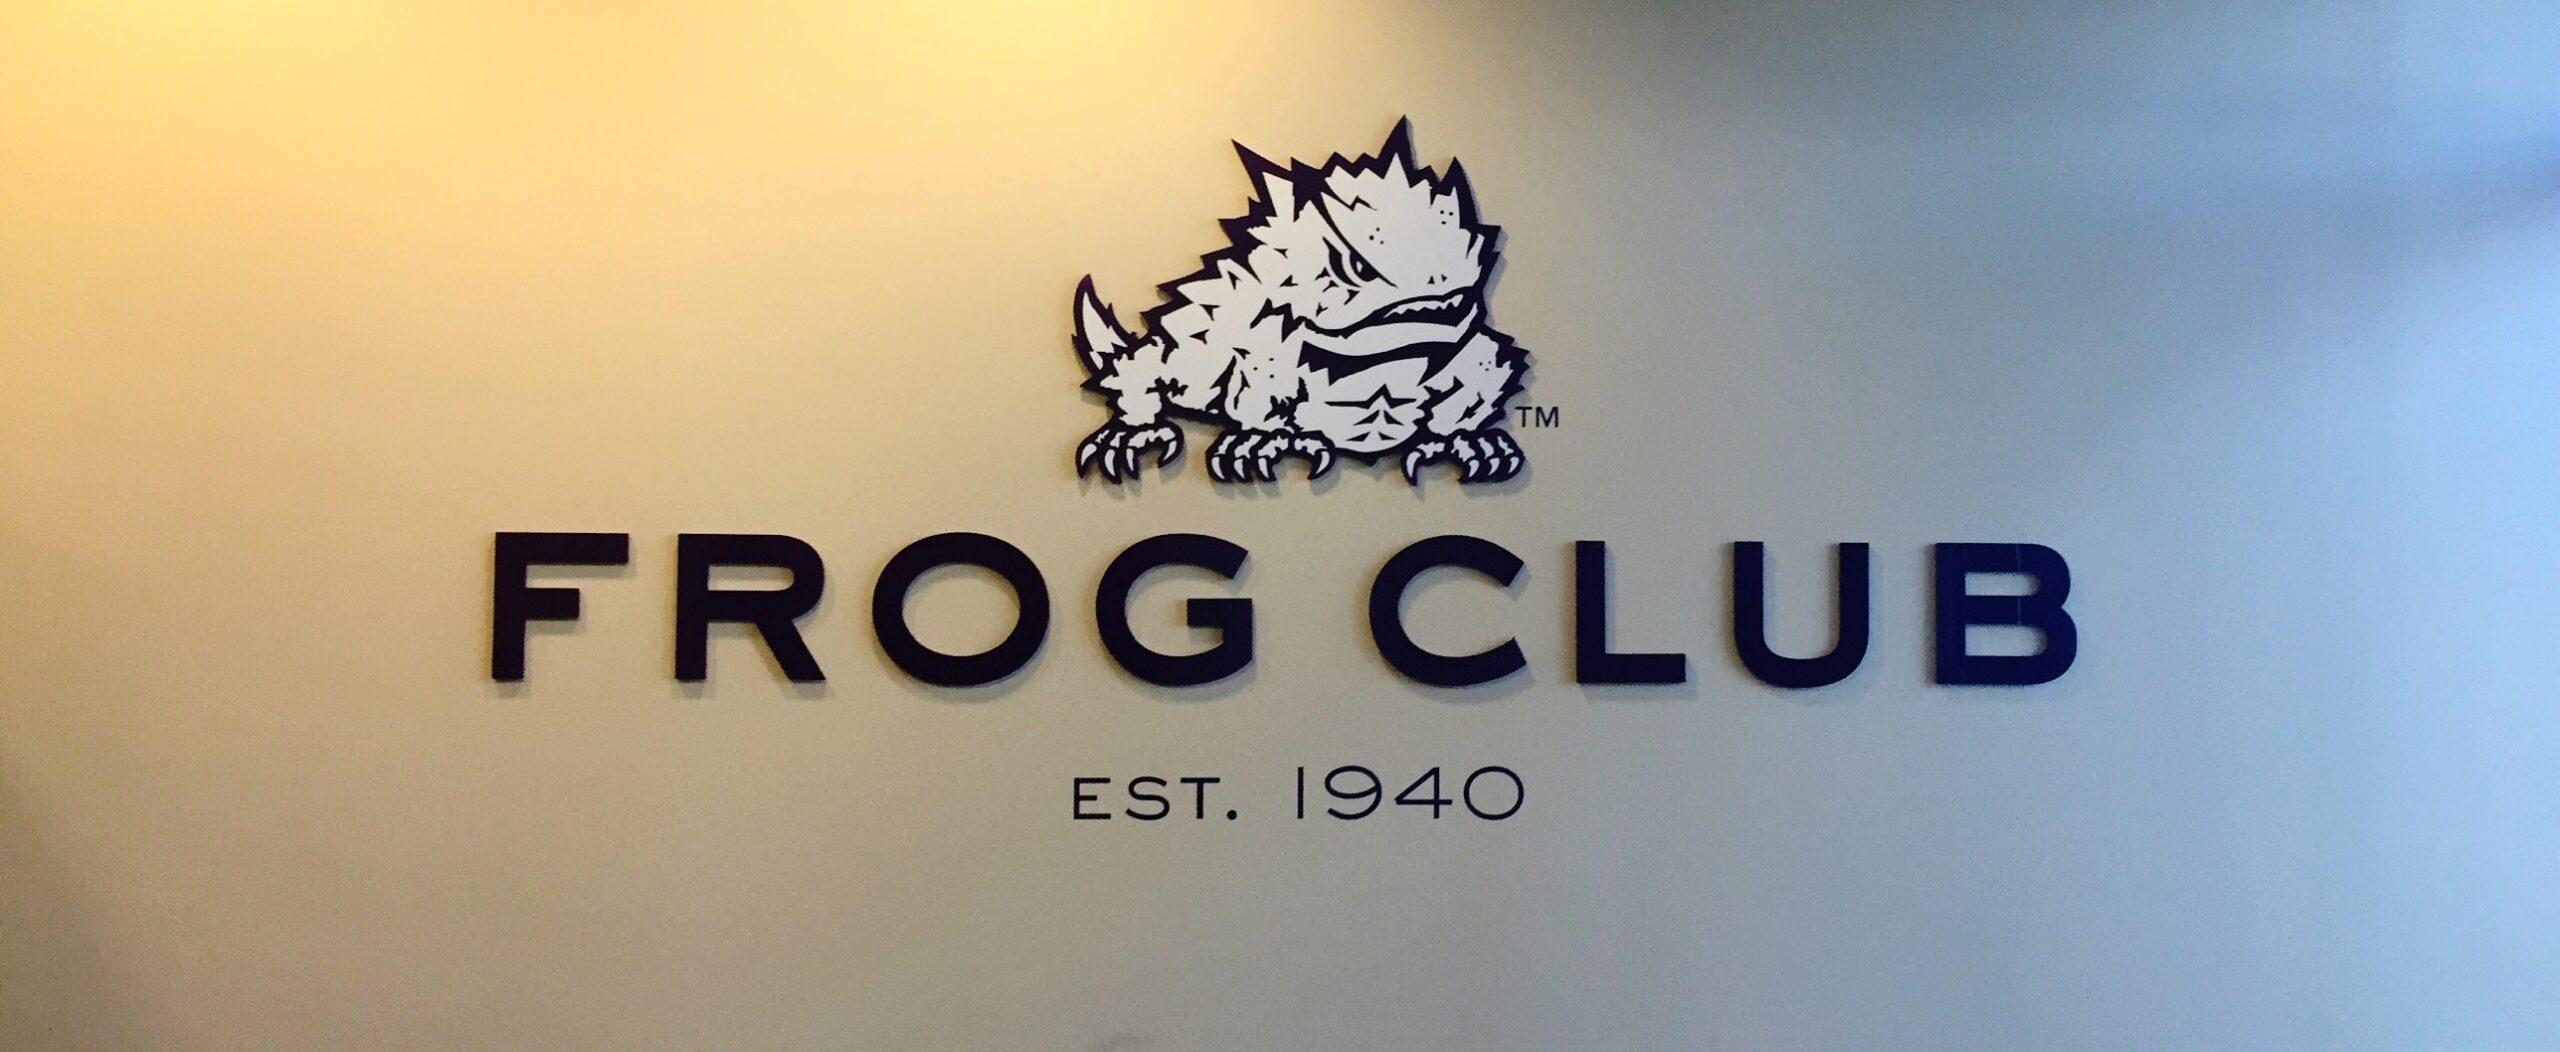 'New Frog Club' to feel more exclusive - TCU 360